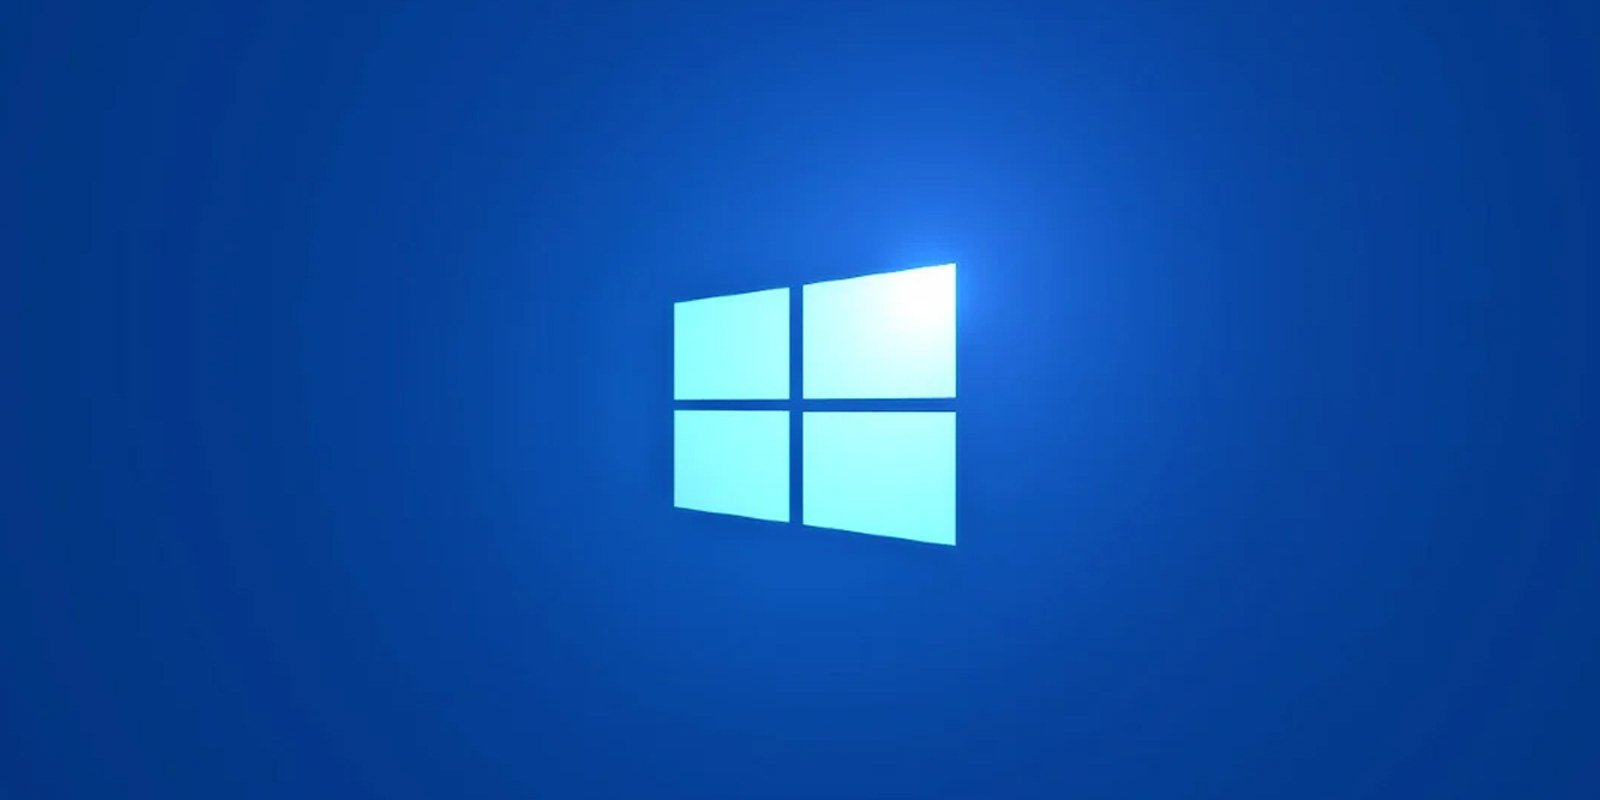 Windows 10 21H1 now in broad deployment, available to everyone